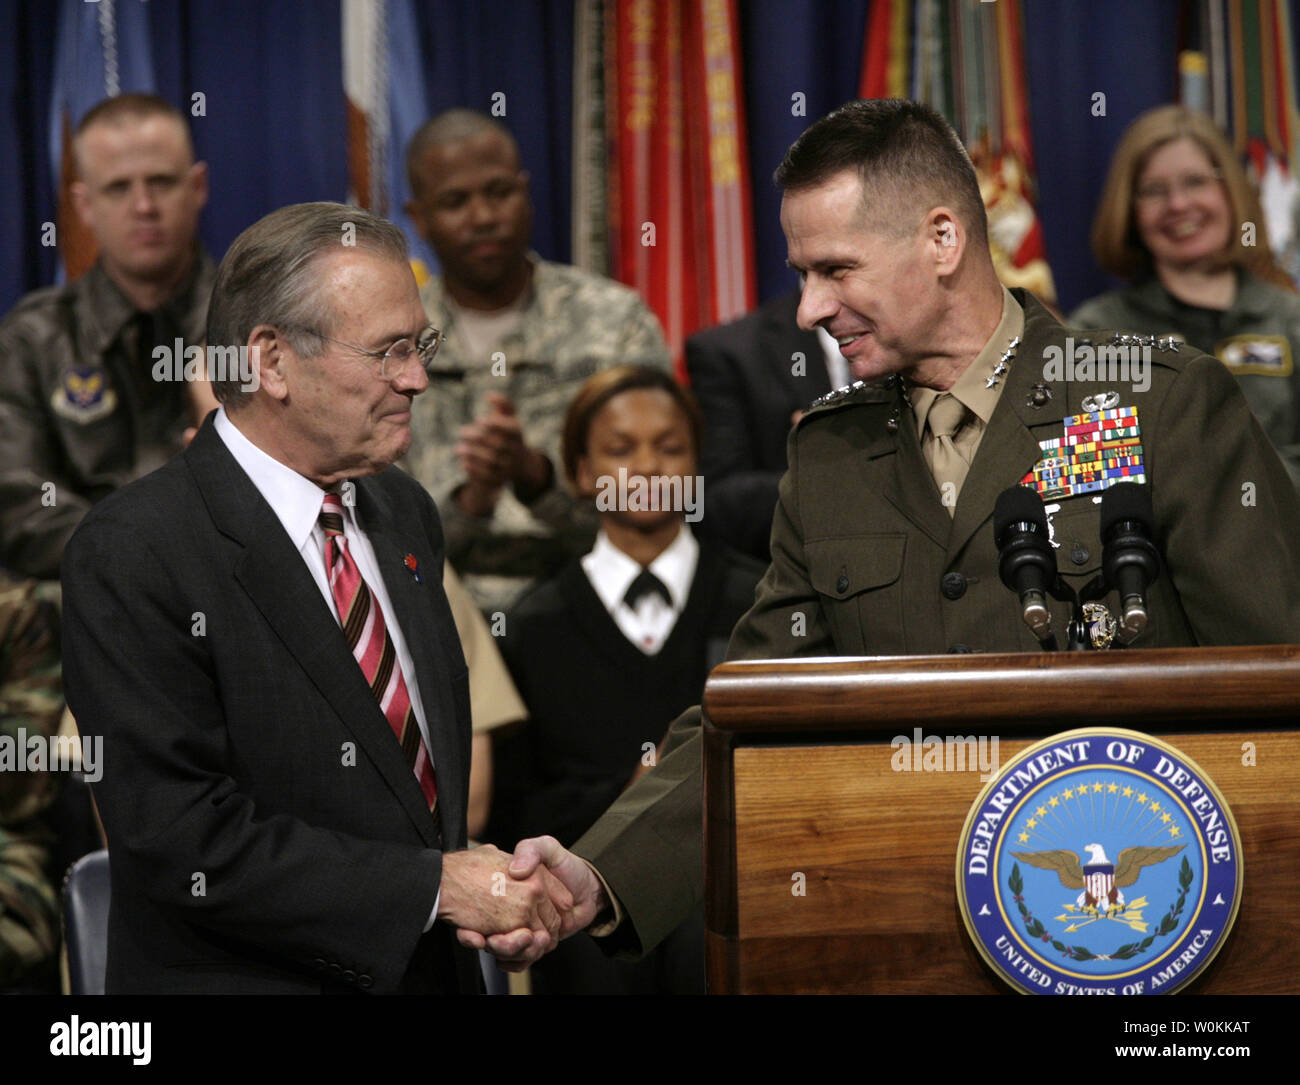 U.S. Defense Secretary Donald Rumsfeld, left, shakes hands with General Peter Pace, Chairman of the Joint Chiefs of Staff, at the Pentagon Town Hall meeting in Washington, December 15, 2005. (UPI Photo/Yuri Gripas) Stock Photo